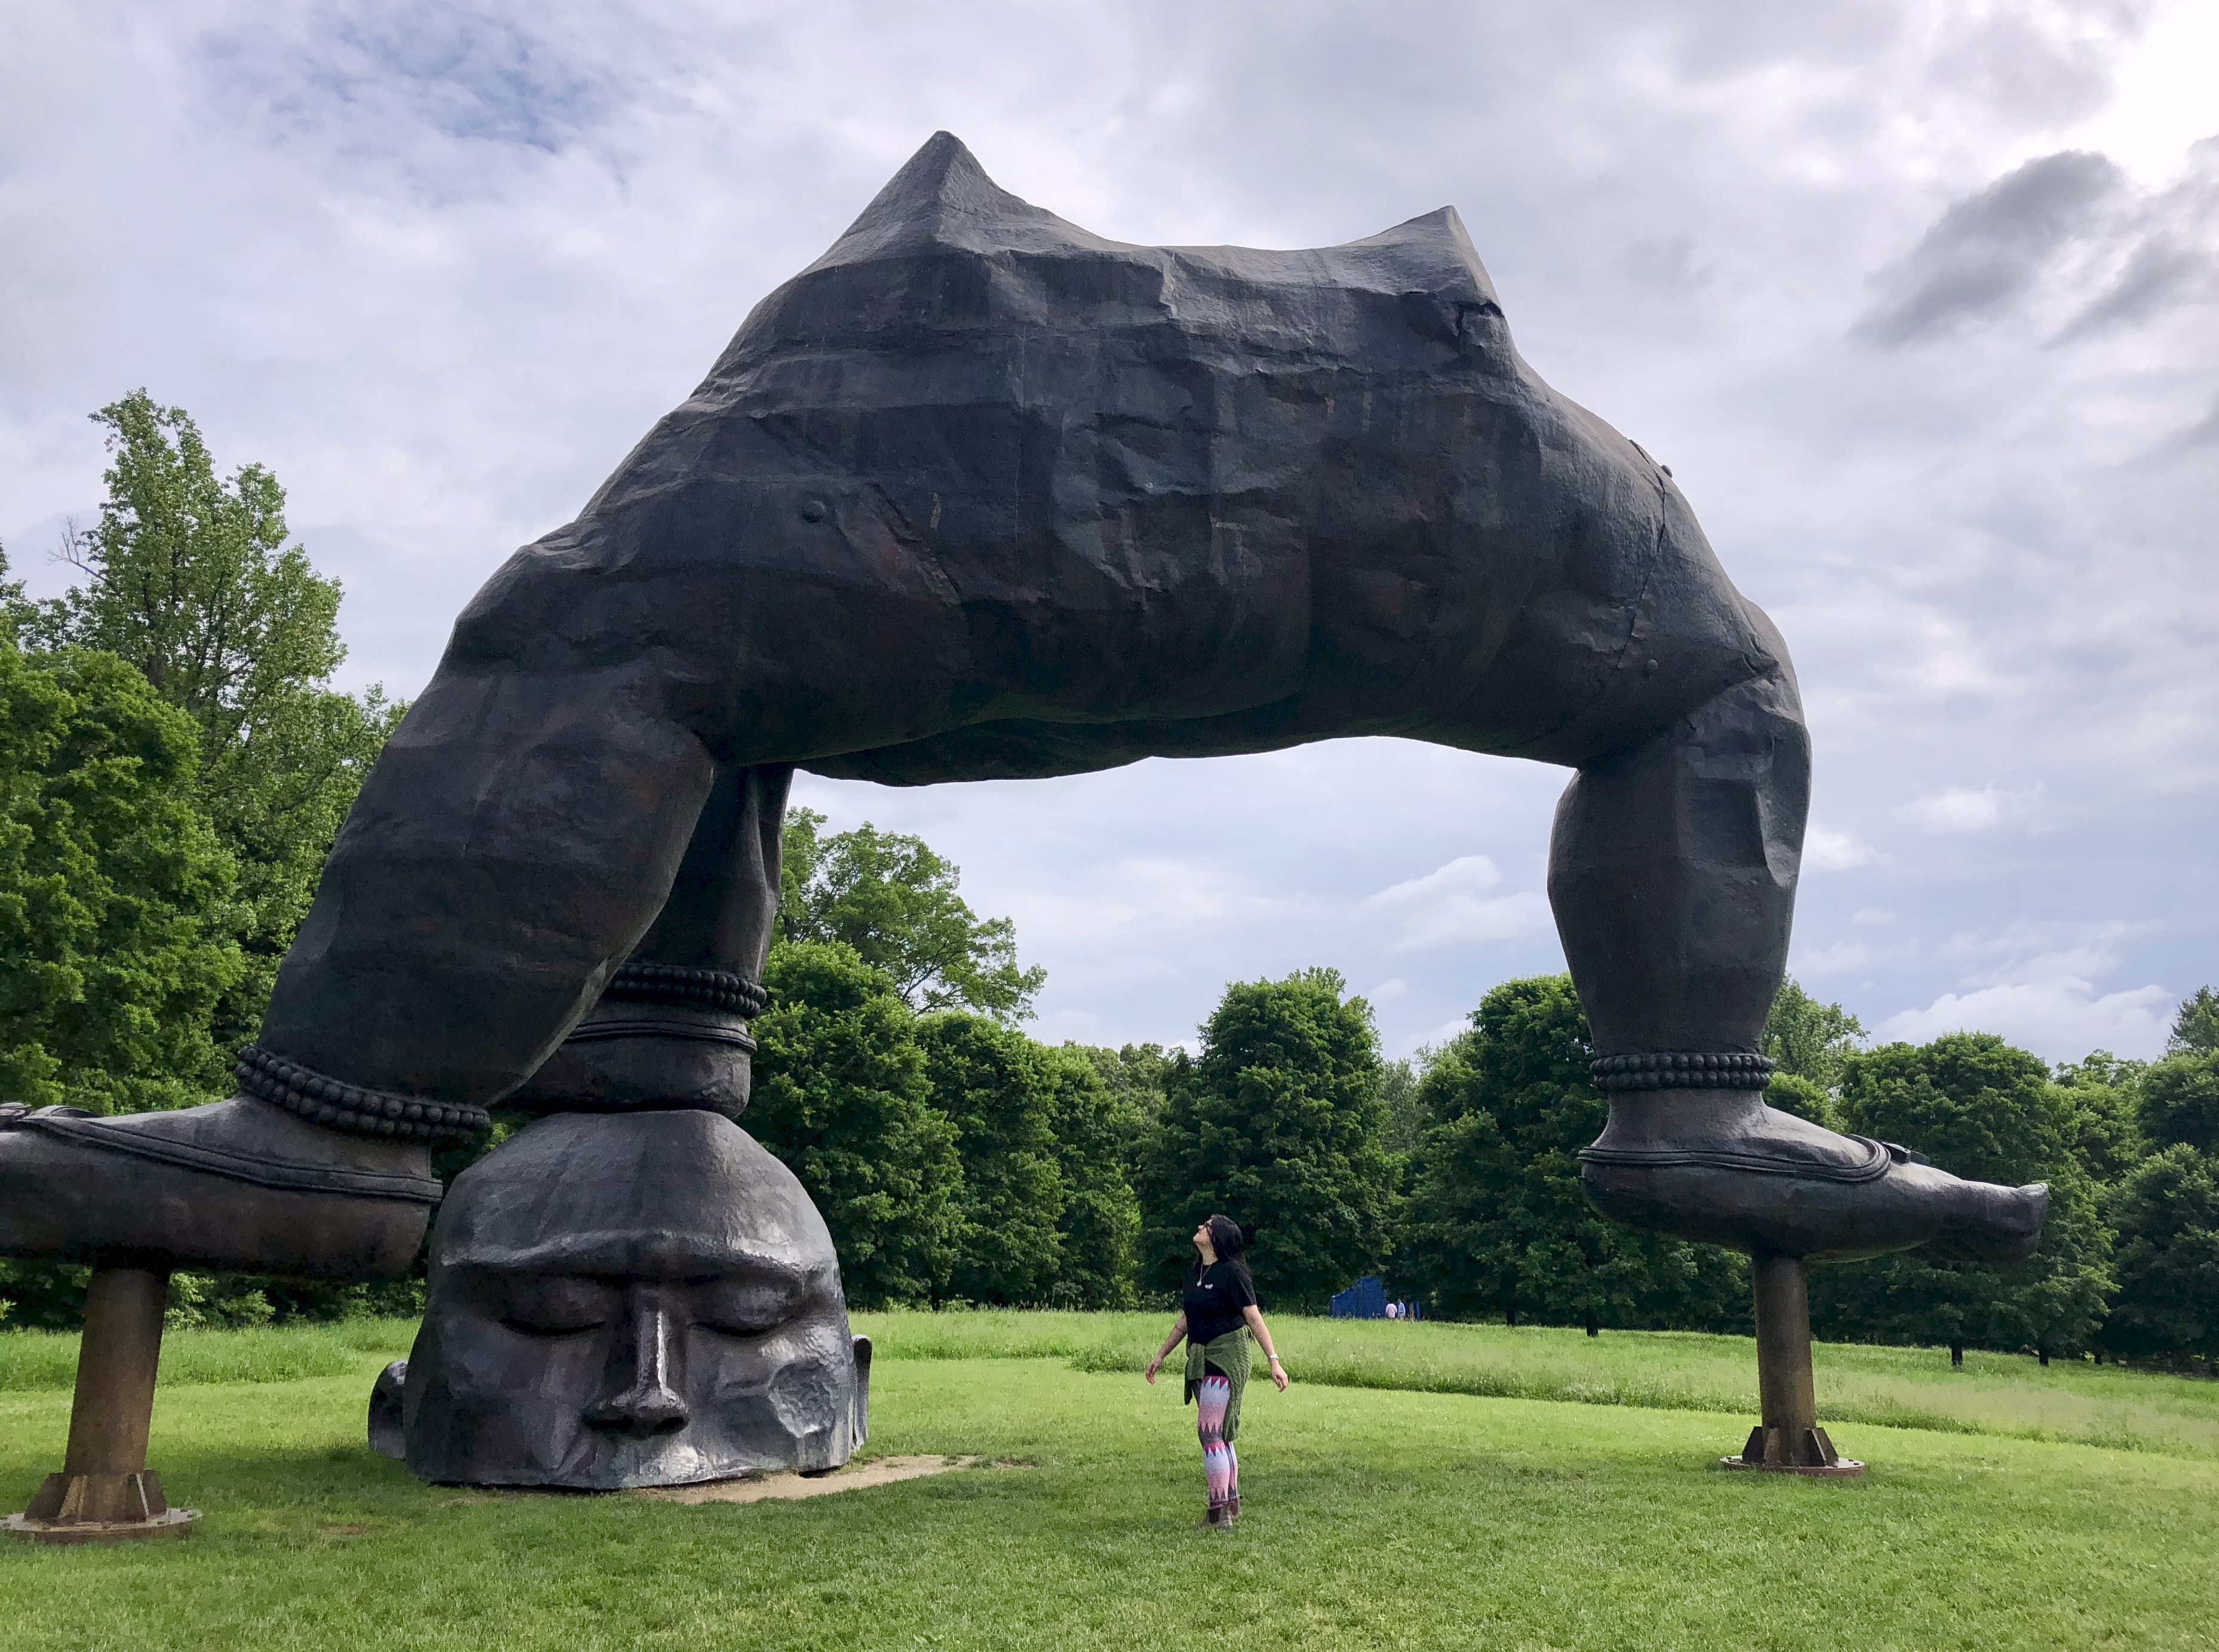 A photo of Gersande standing underneath the huge sculpture of the Three Legged Buddha by Zhang Huan.